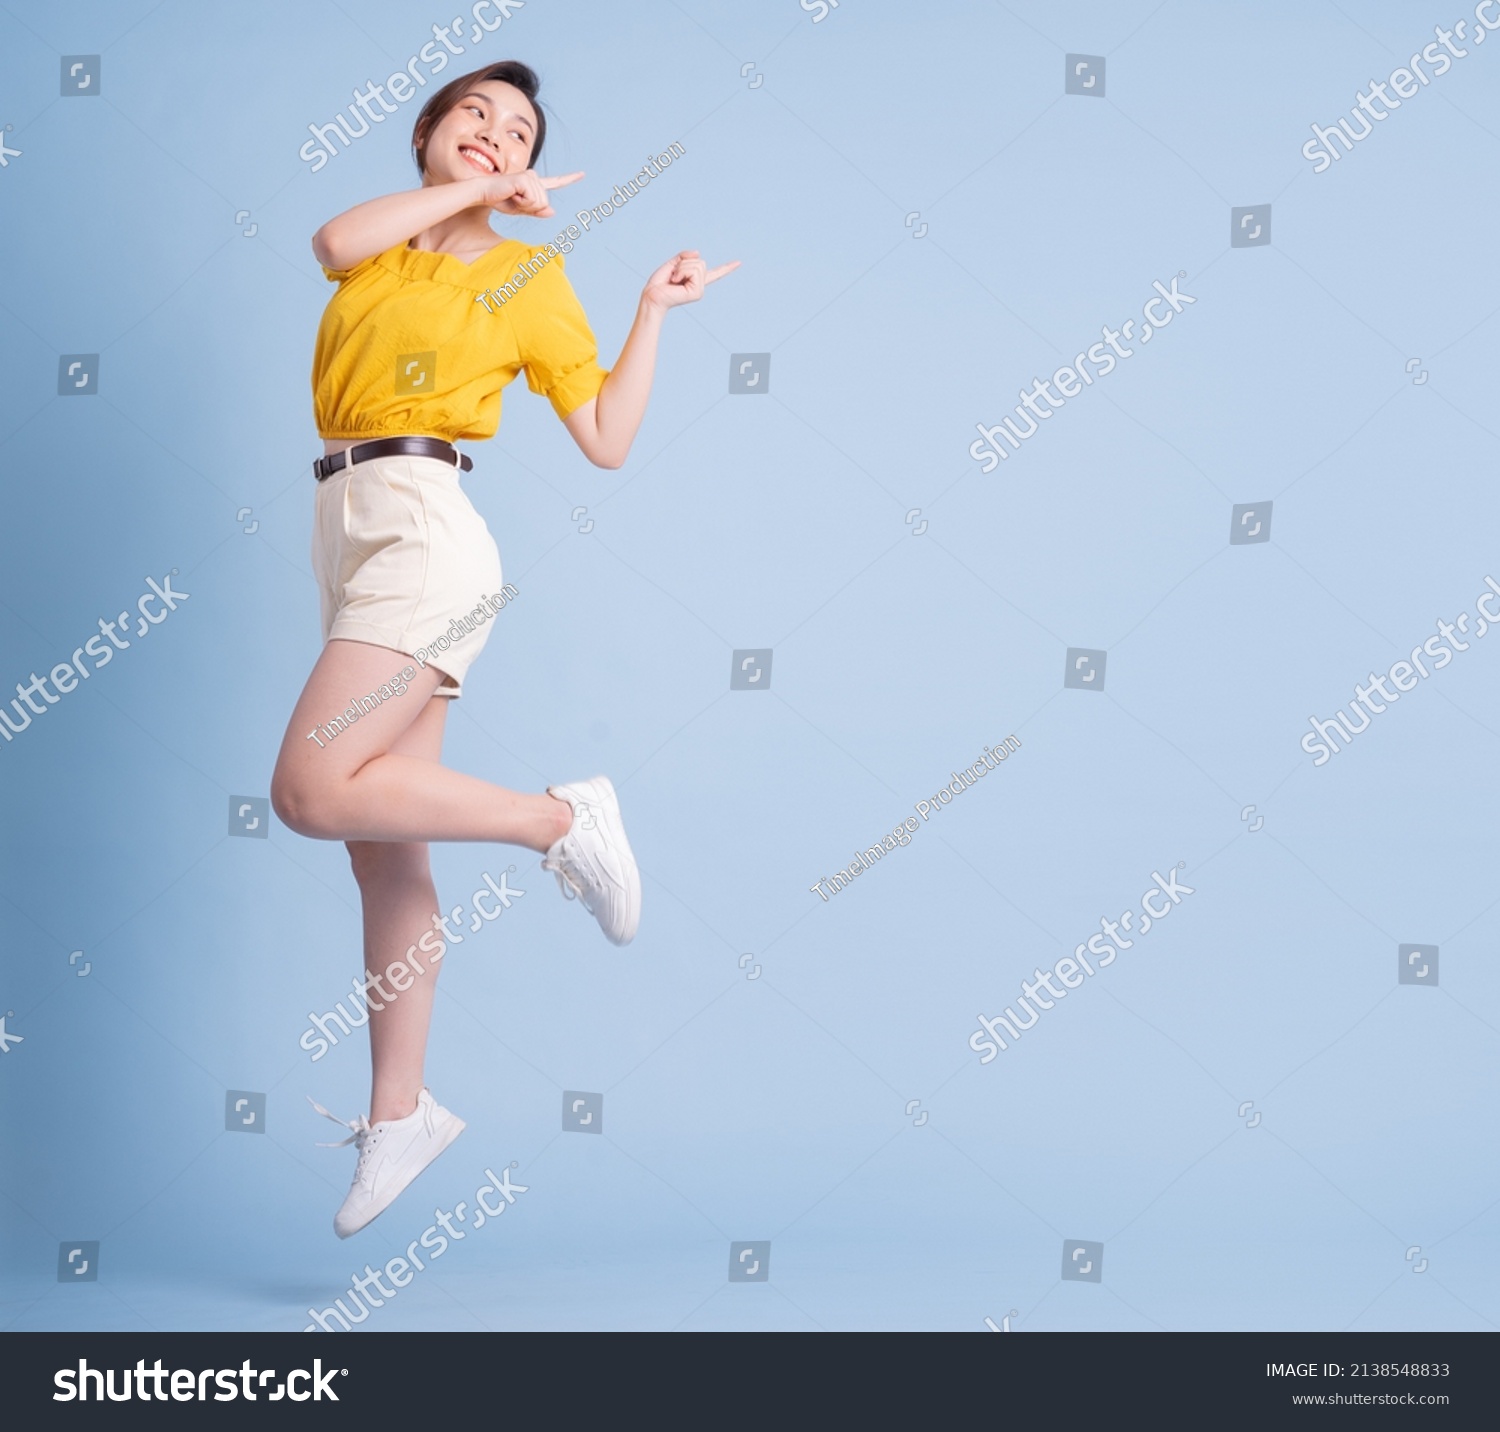 Full Length Image Young Asian Woman Stock Photo 2138548833 | Shutterstock